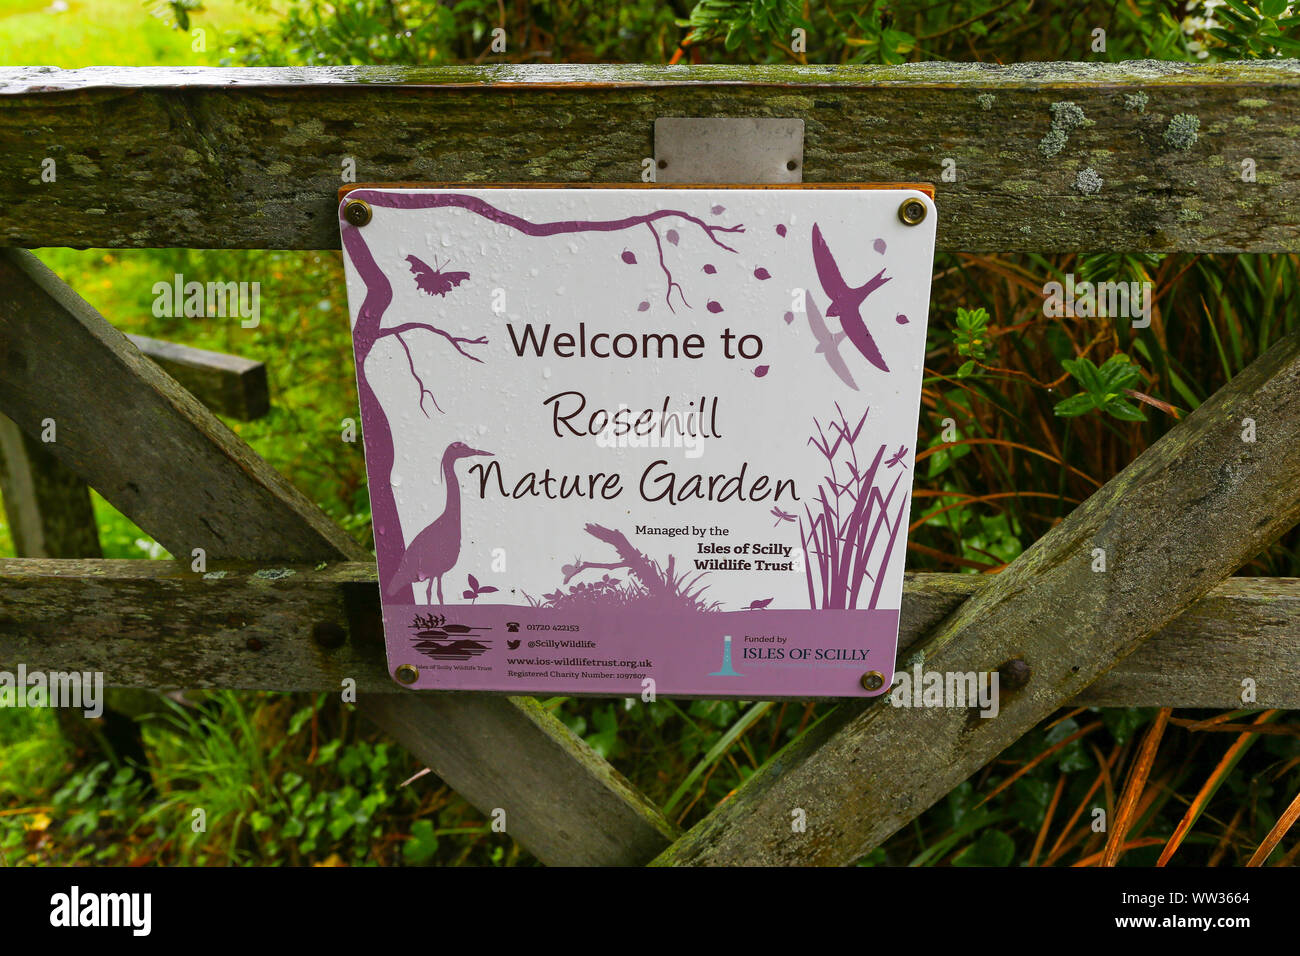 A sign saying 'welcome to Rosehill Nature Garden', St Mary's Island, Isles of Scilly, England, UK Stock Photo